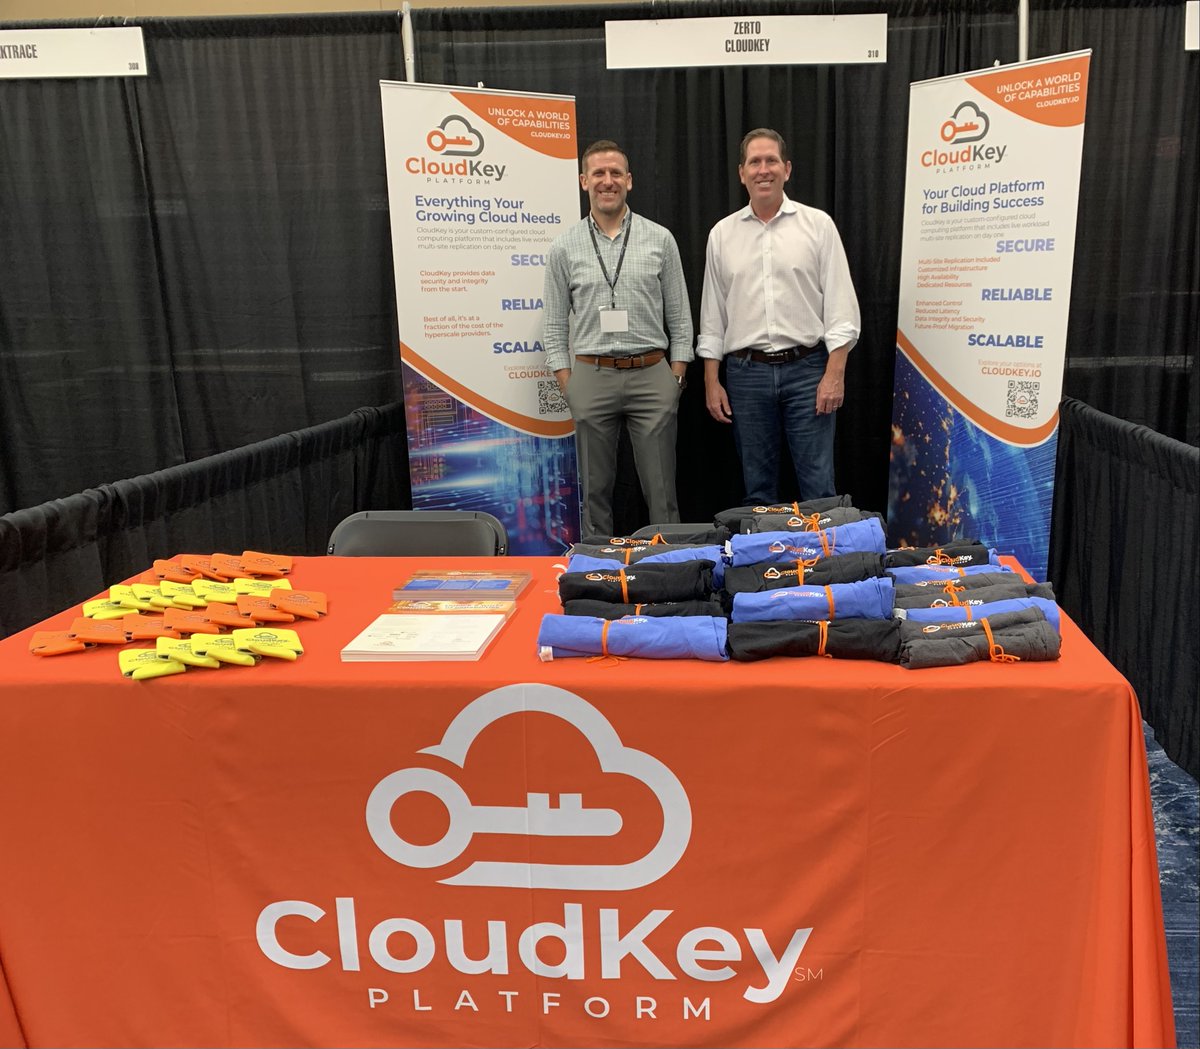 Jonathan Pike and Chris Martin came to ElevateIT loaded with swag and knowledge. The kind of knowledge that helps you elevate your business to a better cloud.

Visit Cloudkey.io for more information.

#cloudkey #cloudkeyplatform #cloudplatform #cloudcomputing